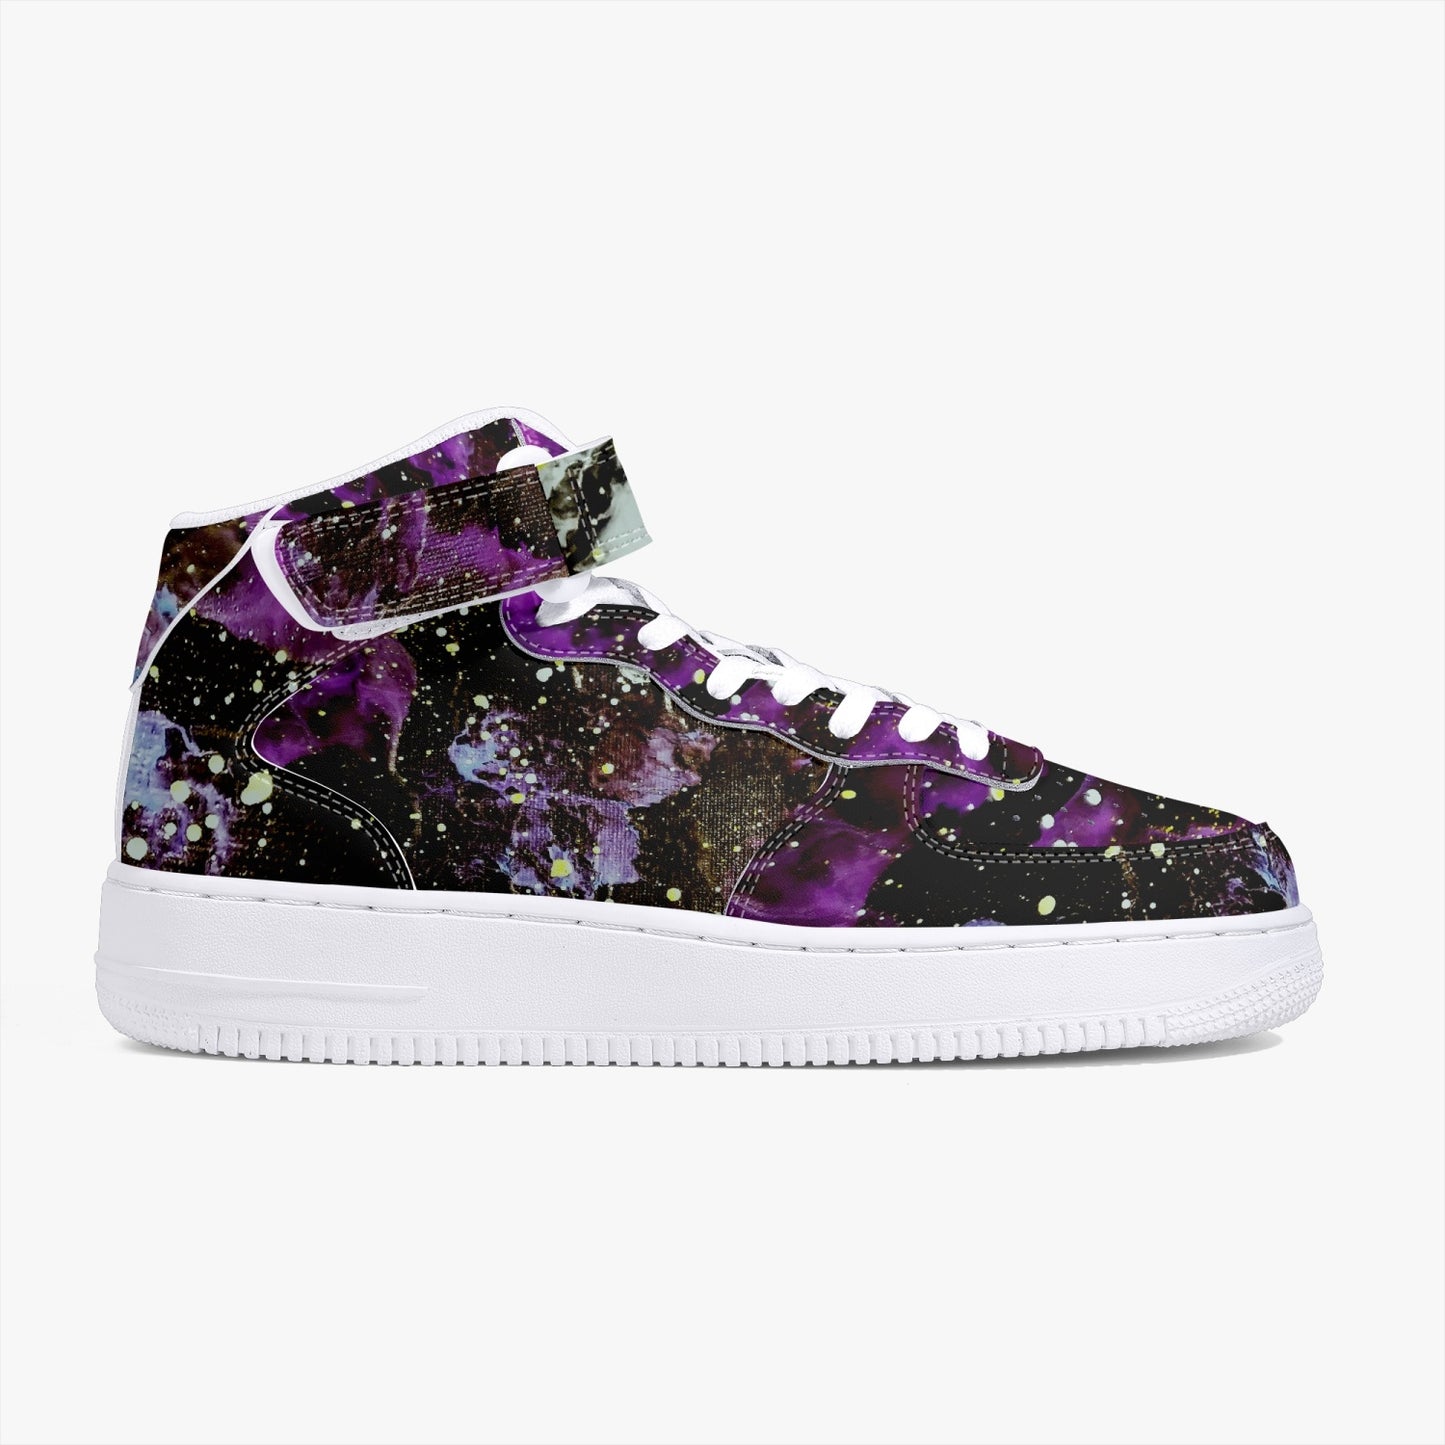 Galactic Storm AF1 High-Top Leather Sports Sneakers